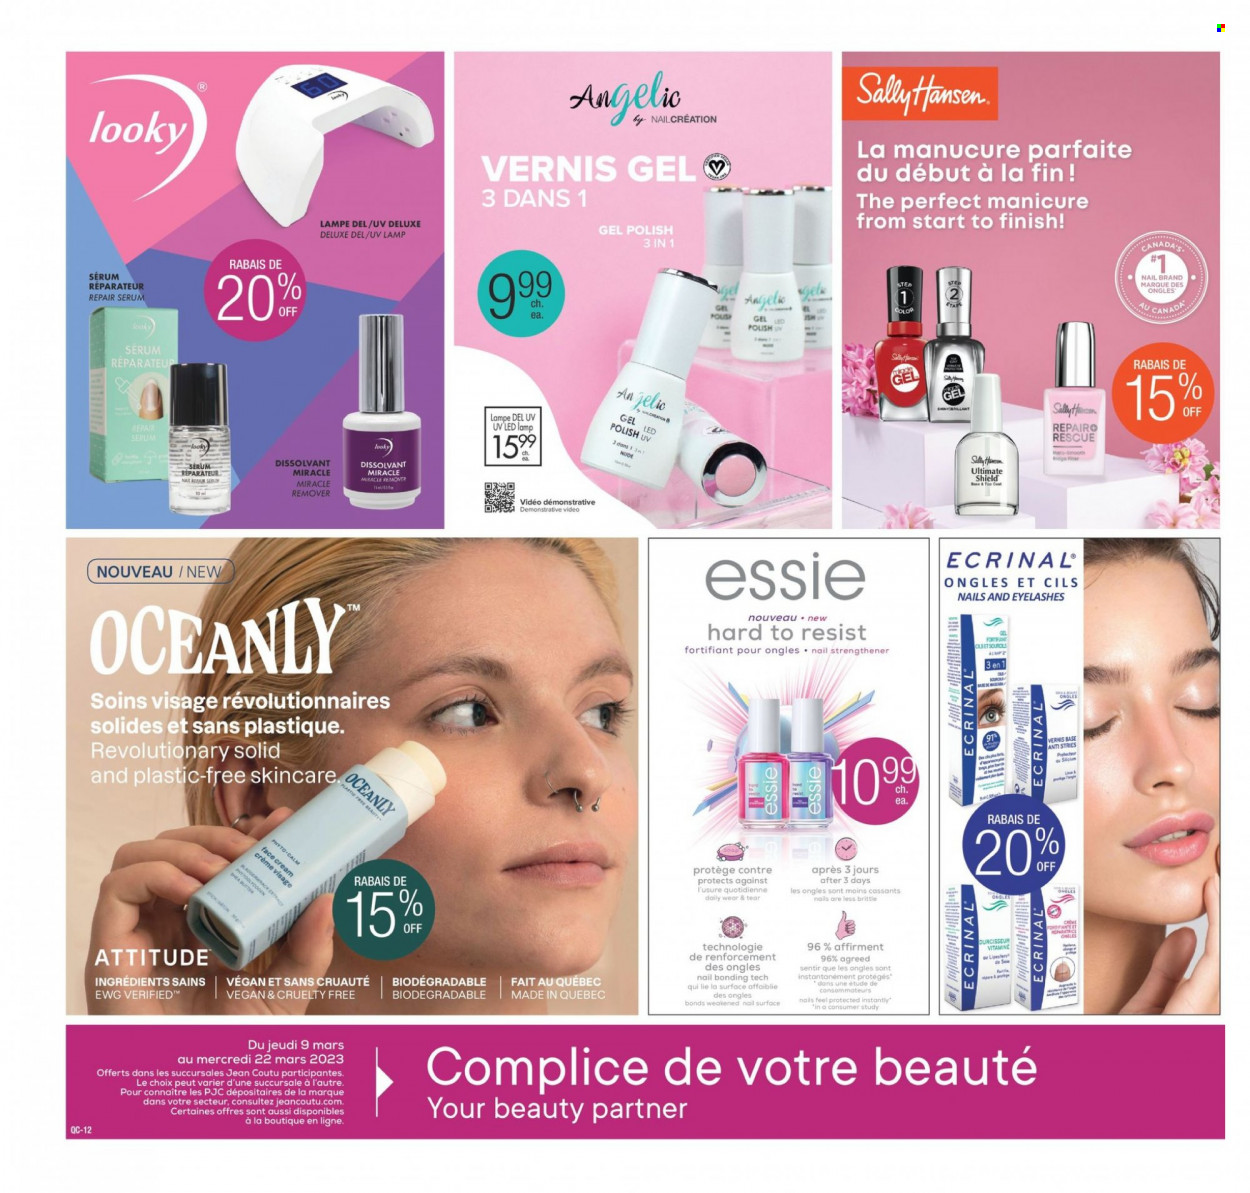 Jean Coutu flyer  - March 09, 2023 - March 22, 2023.